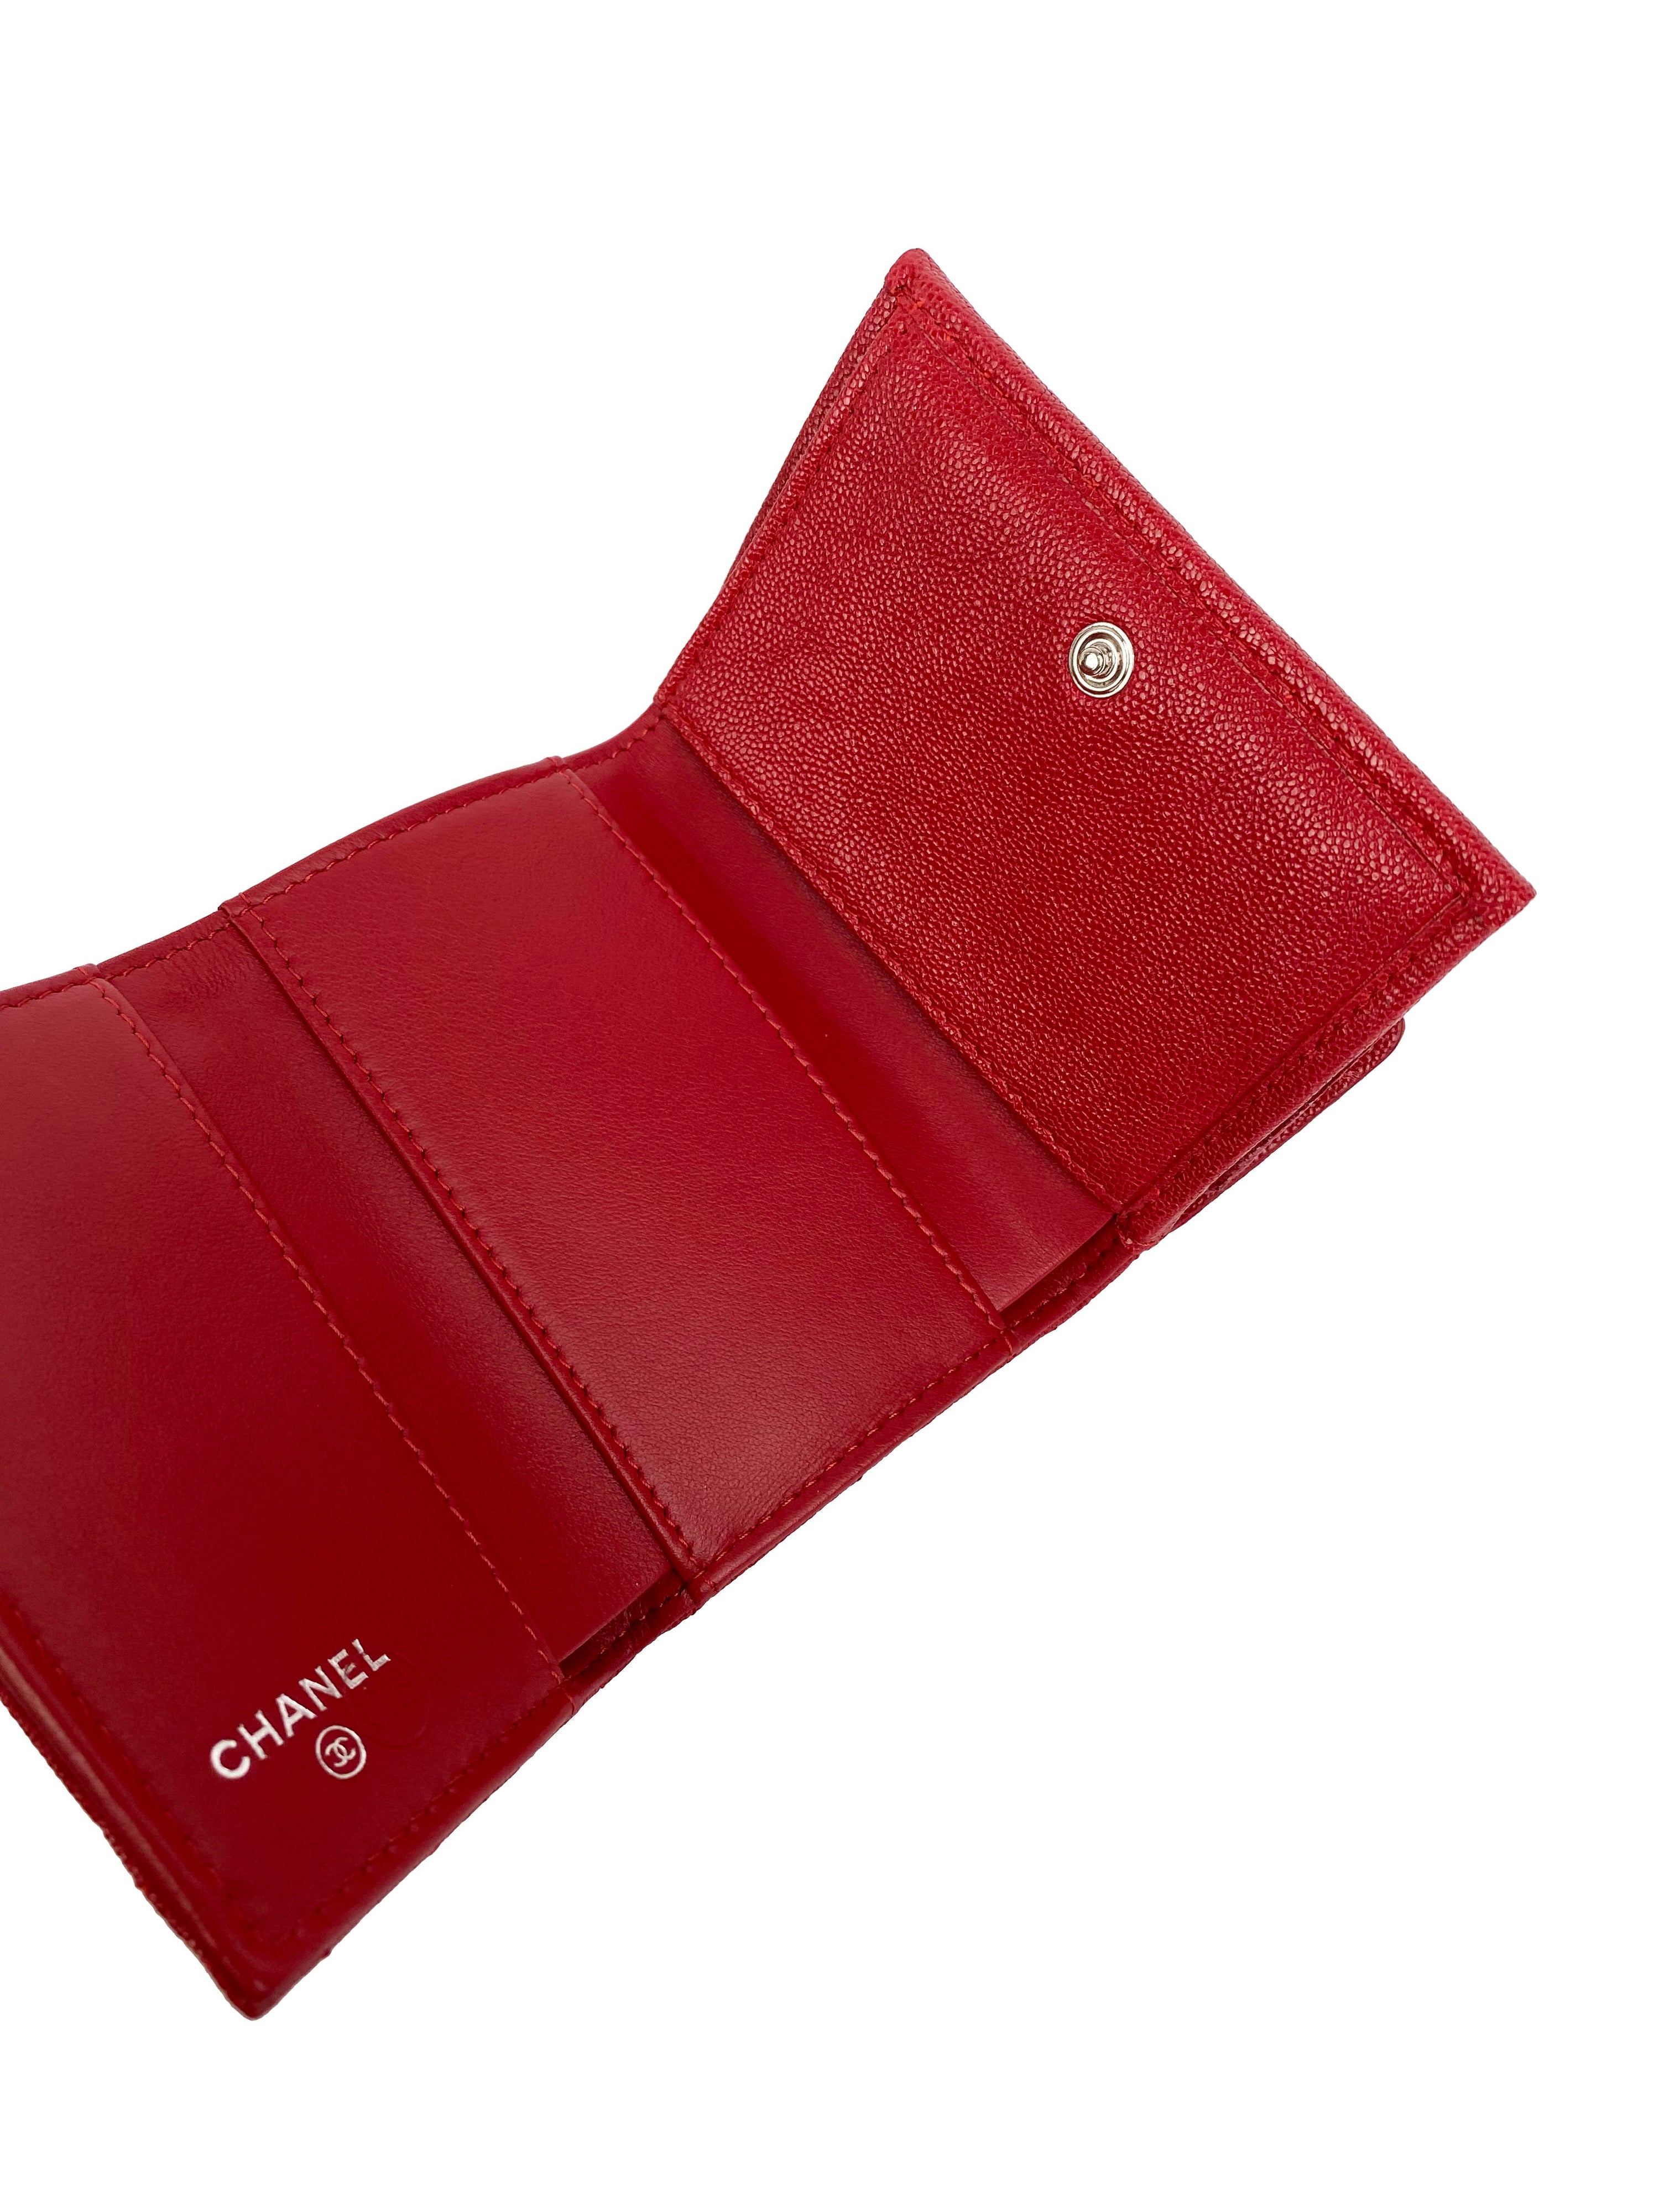 Chanel Red Boy Compact Wallet